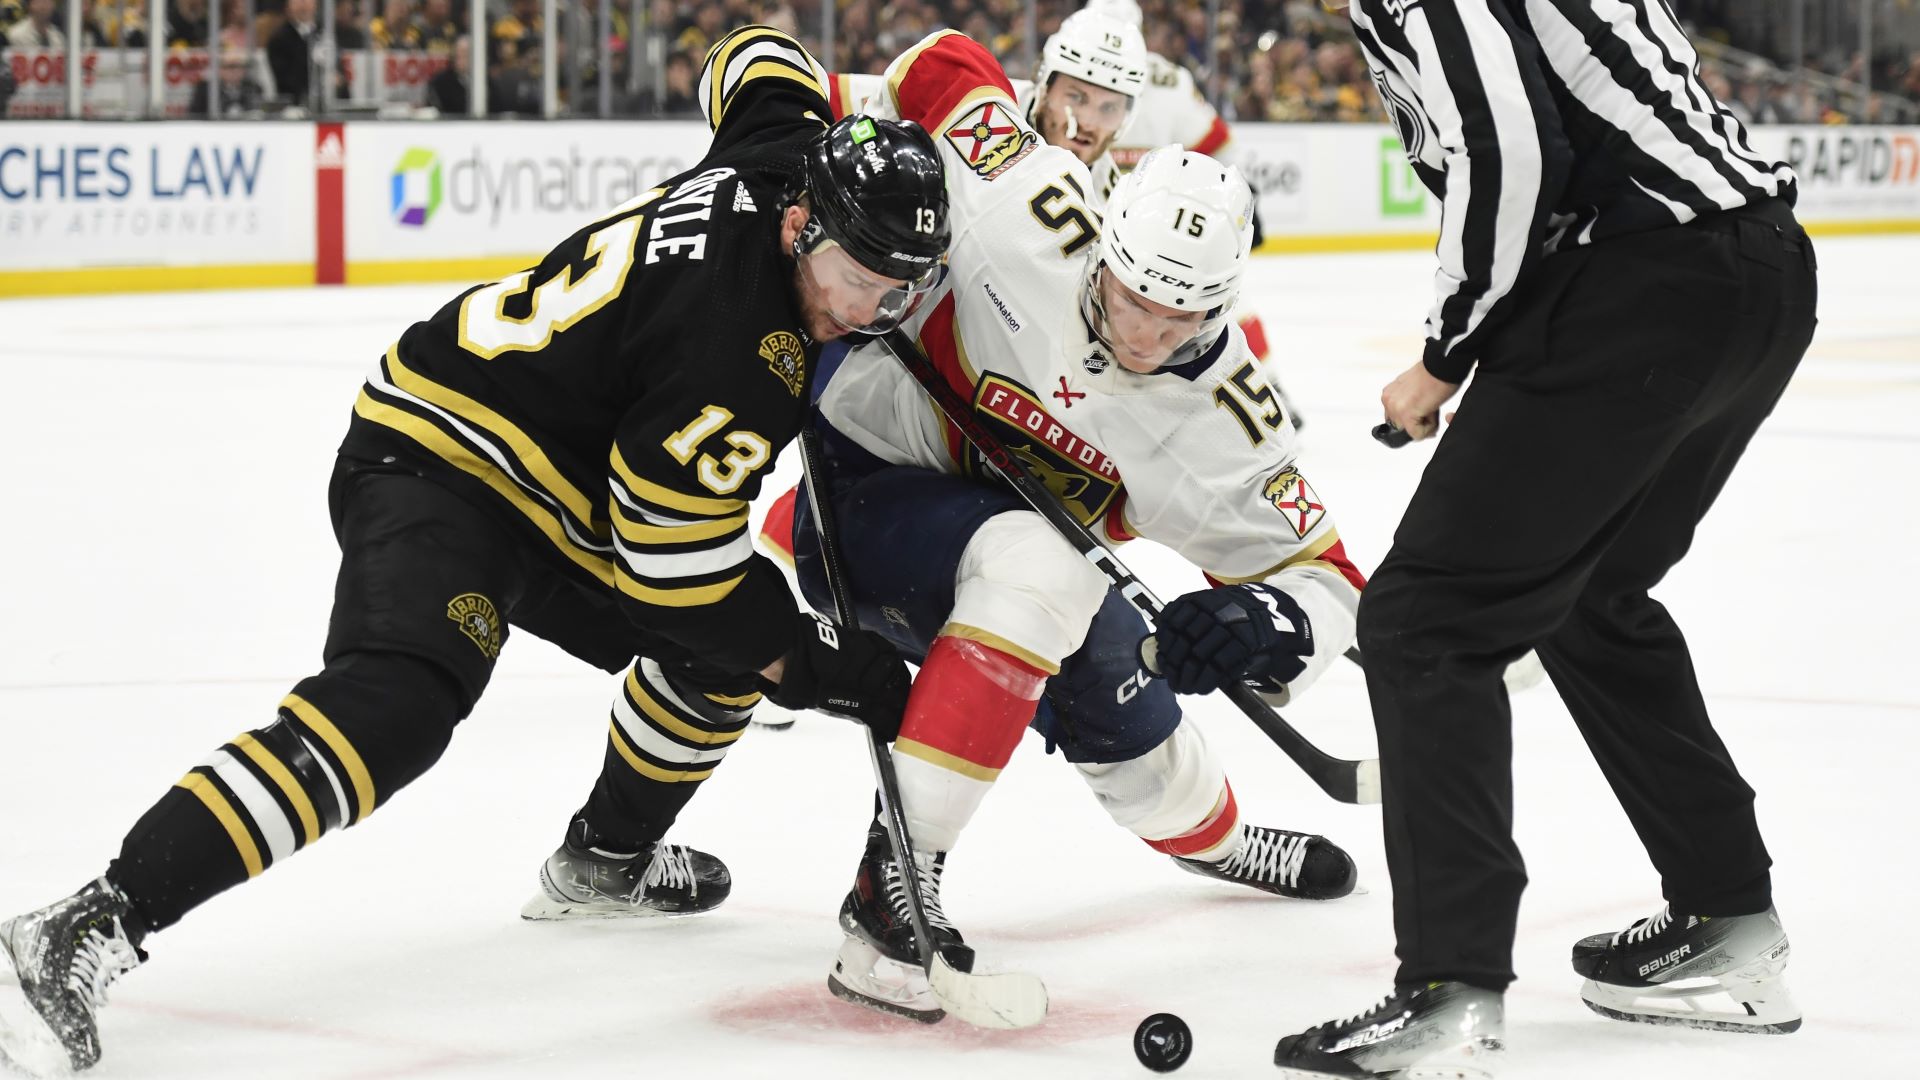 Bruins Wrap: Heartbreaking Game 6 Loss To Panthers Ends Boston's Season